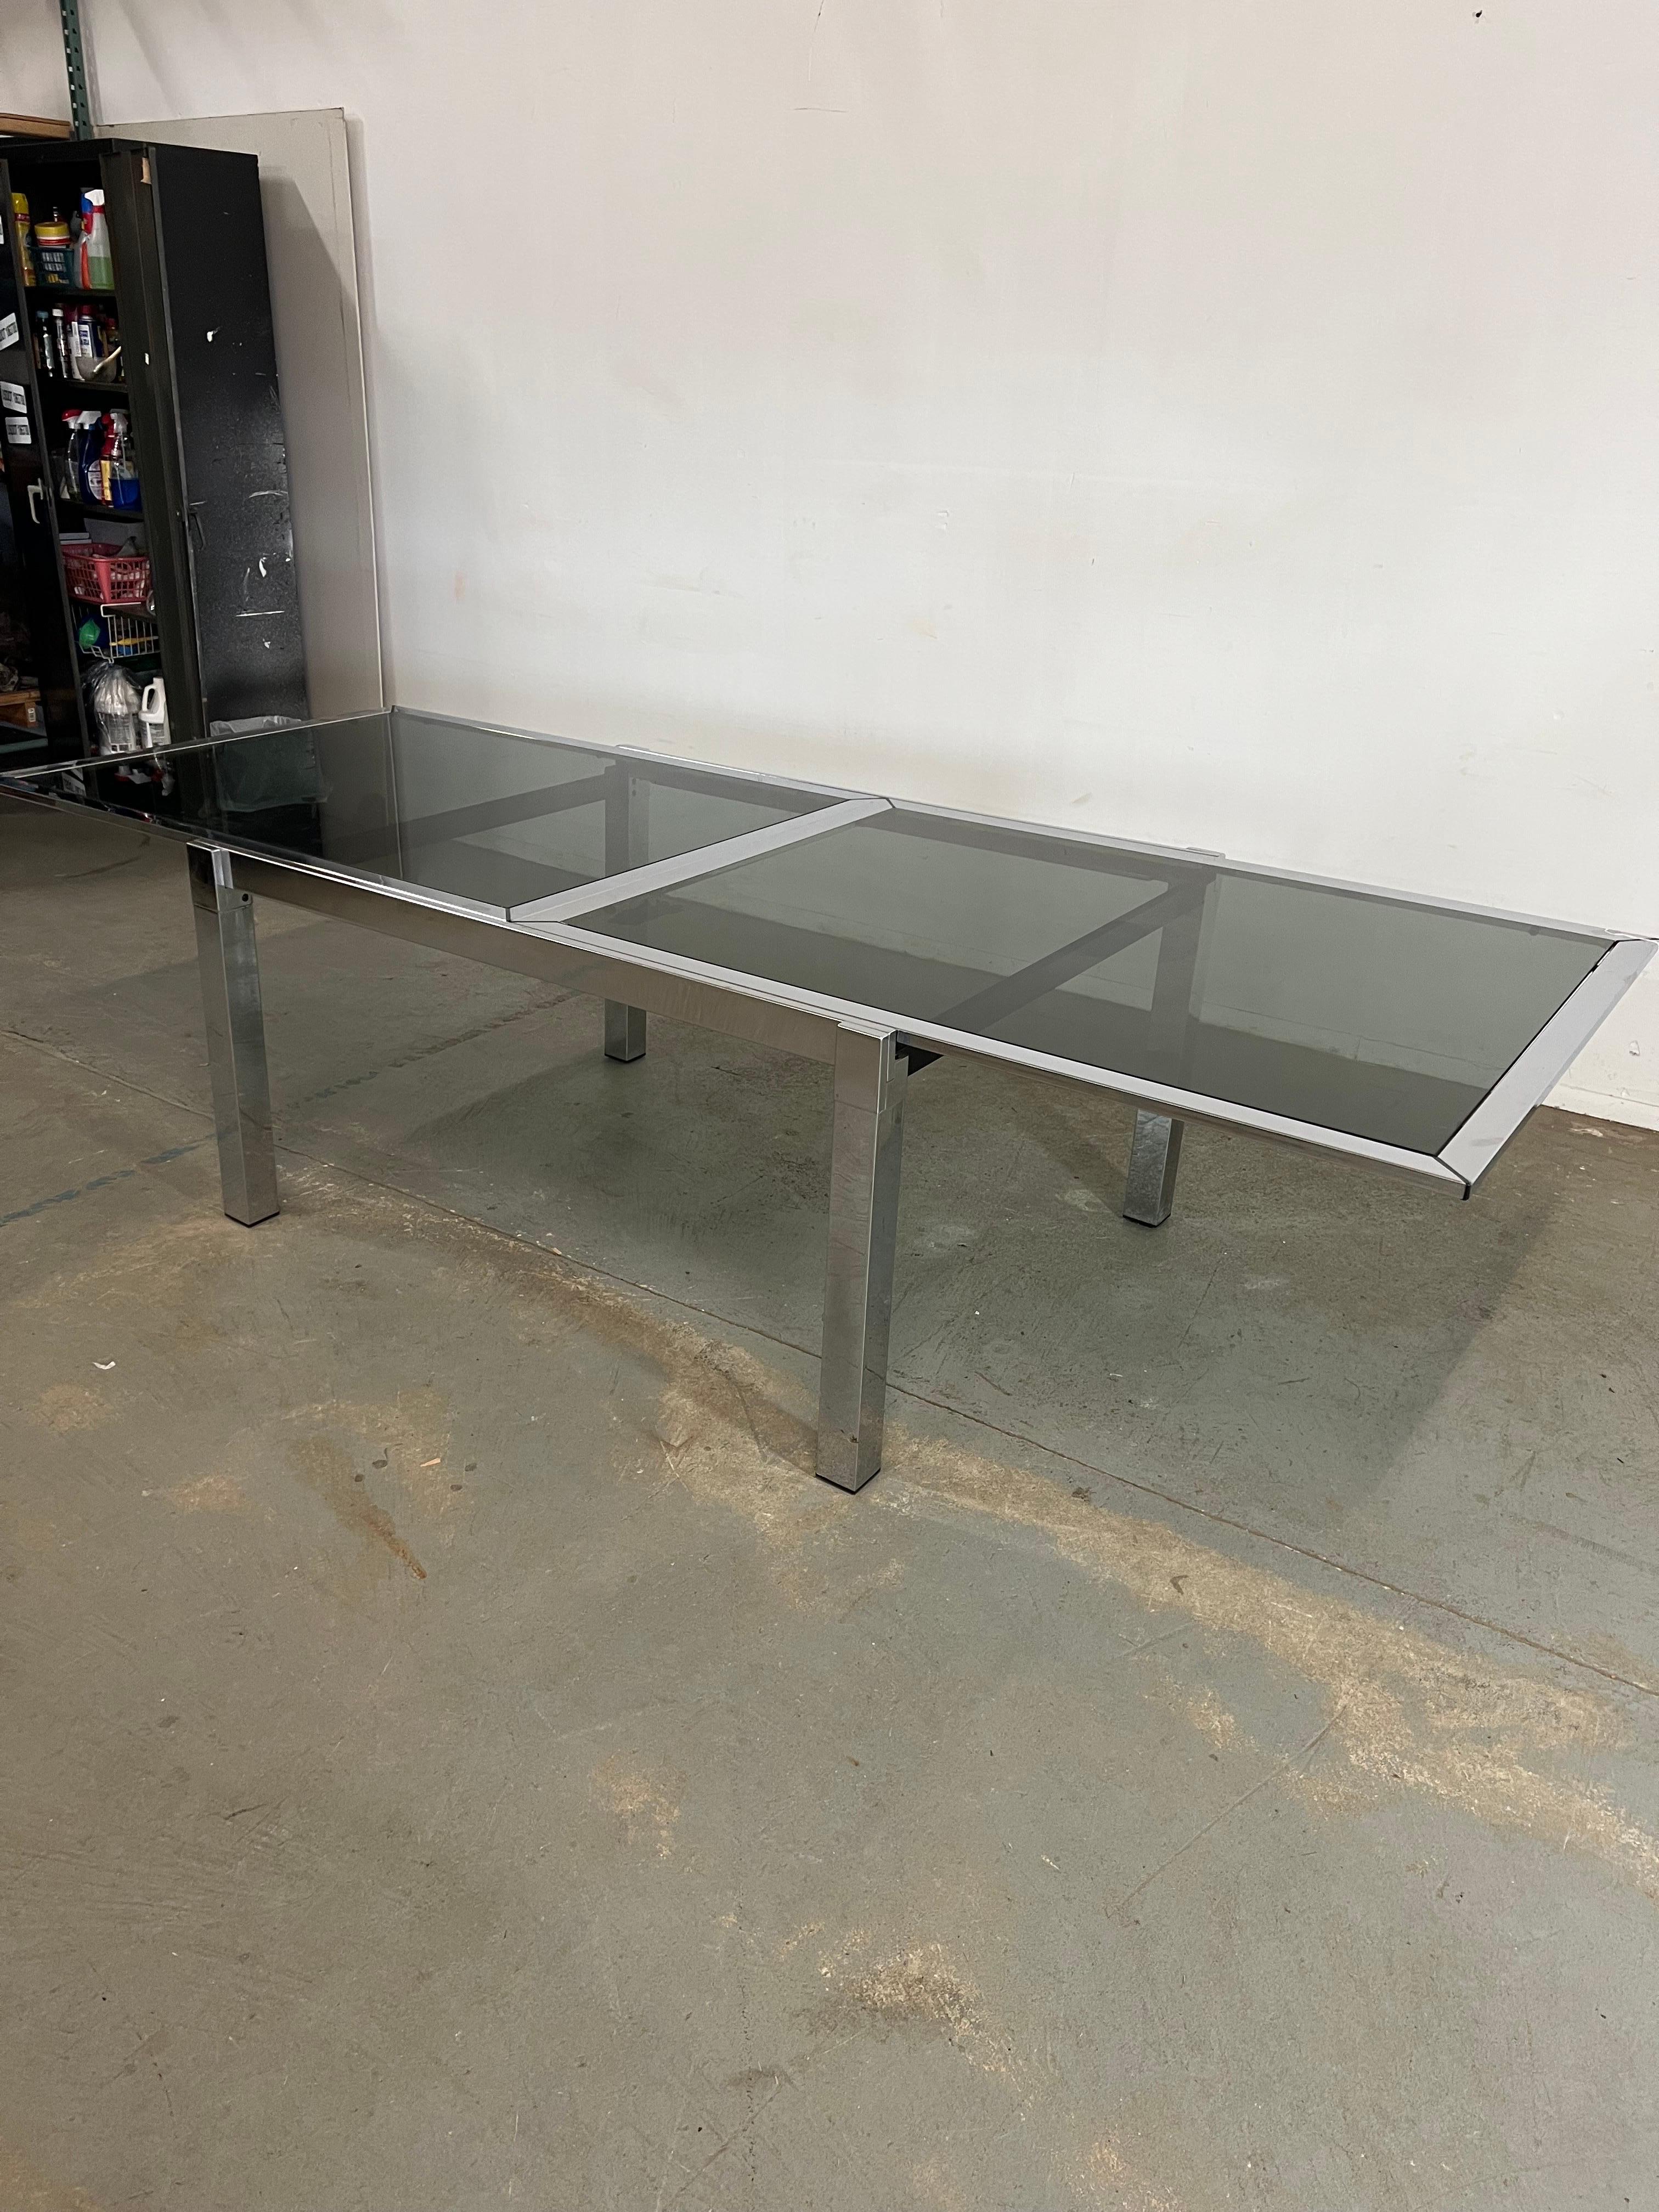 Offered is a midcentury Danish Modern Milo Baughman Chrome Extension Dining Table. The table has a great midcentury look to it. The measurements make this table very versatile, the table can be displayed at 55” and can open when entertaining to